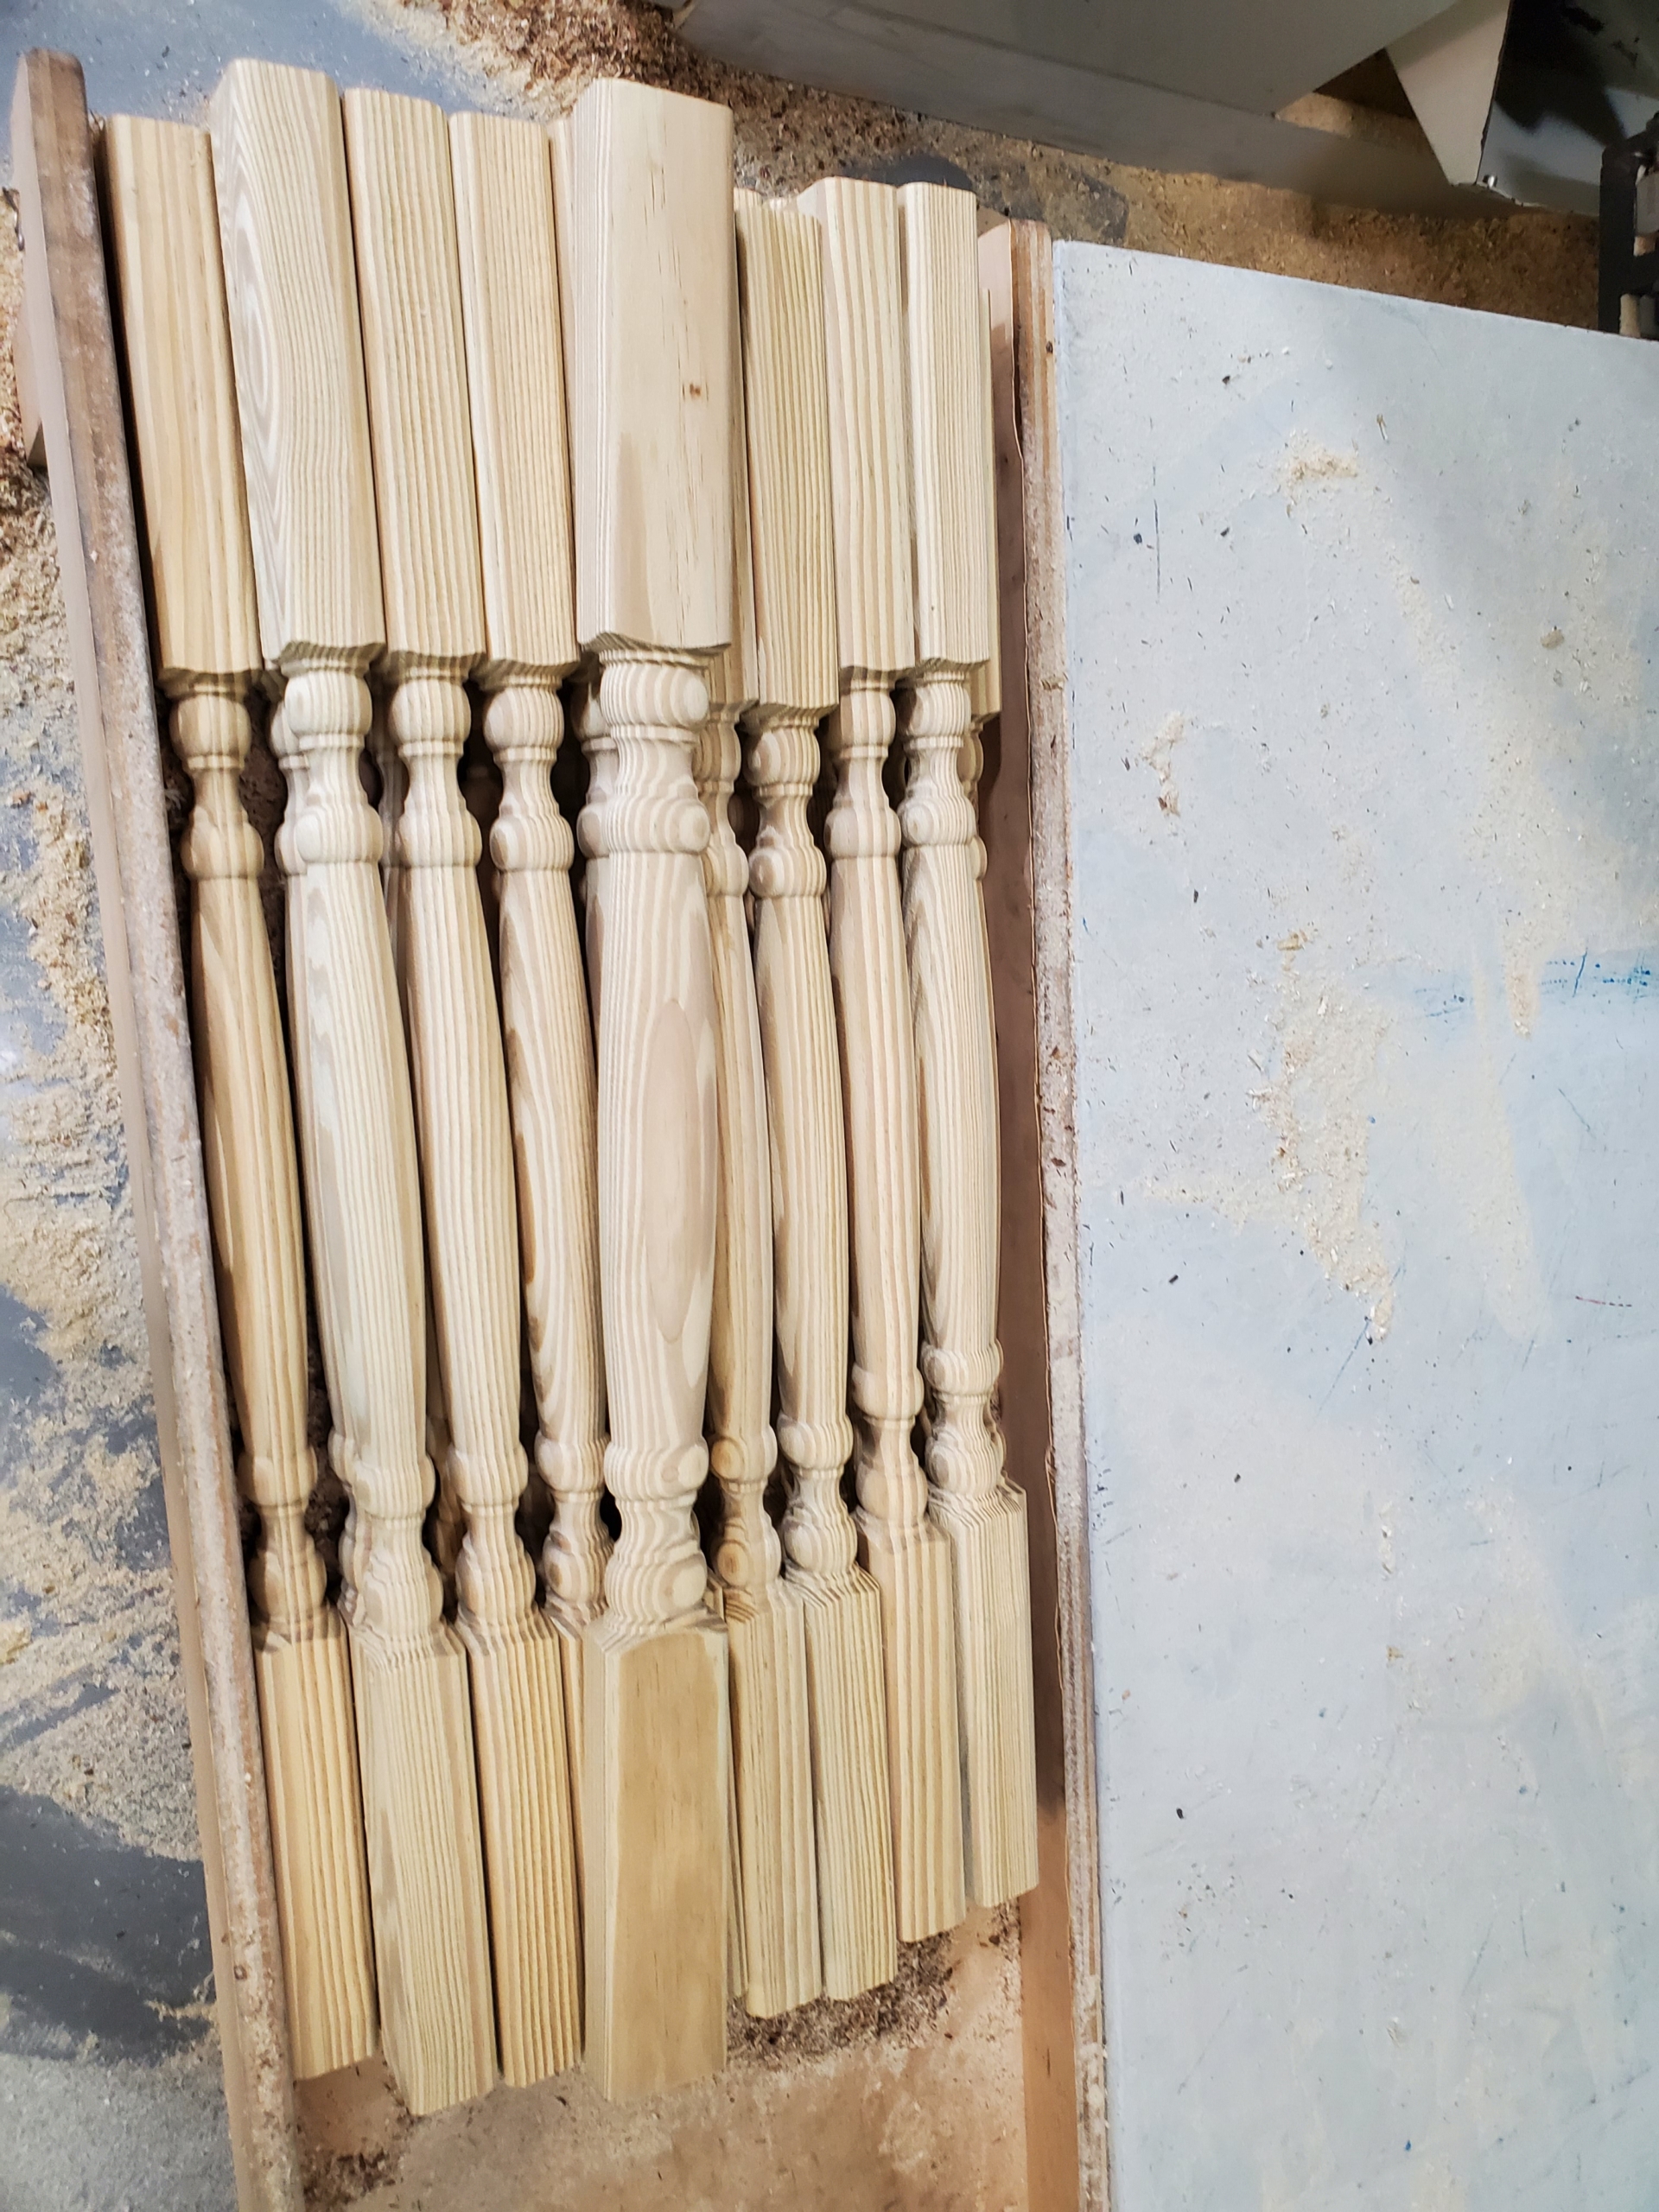 Dry, pressure-treated yellow pine oval balusters.